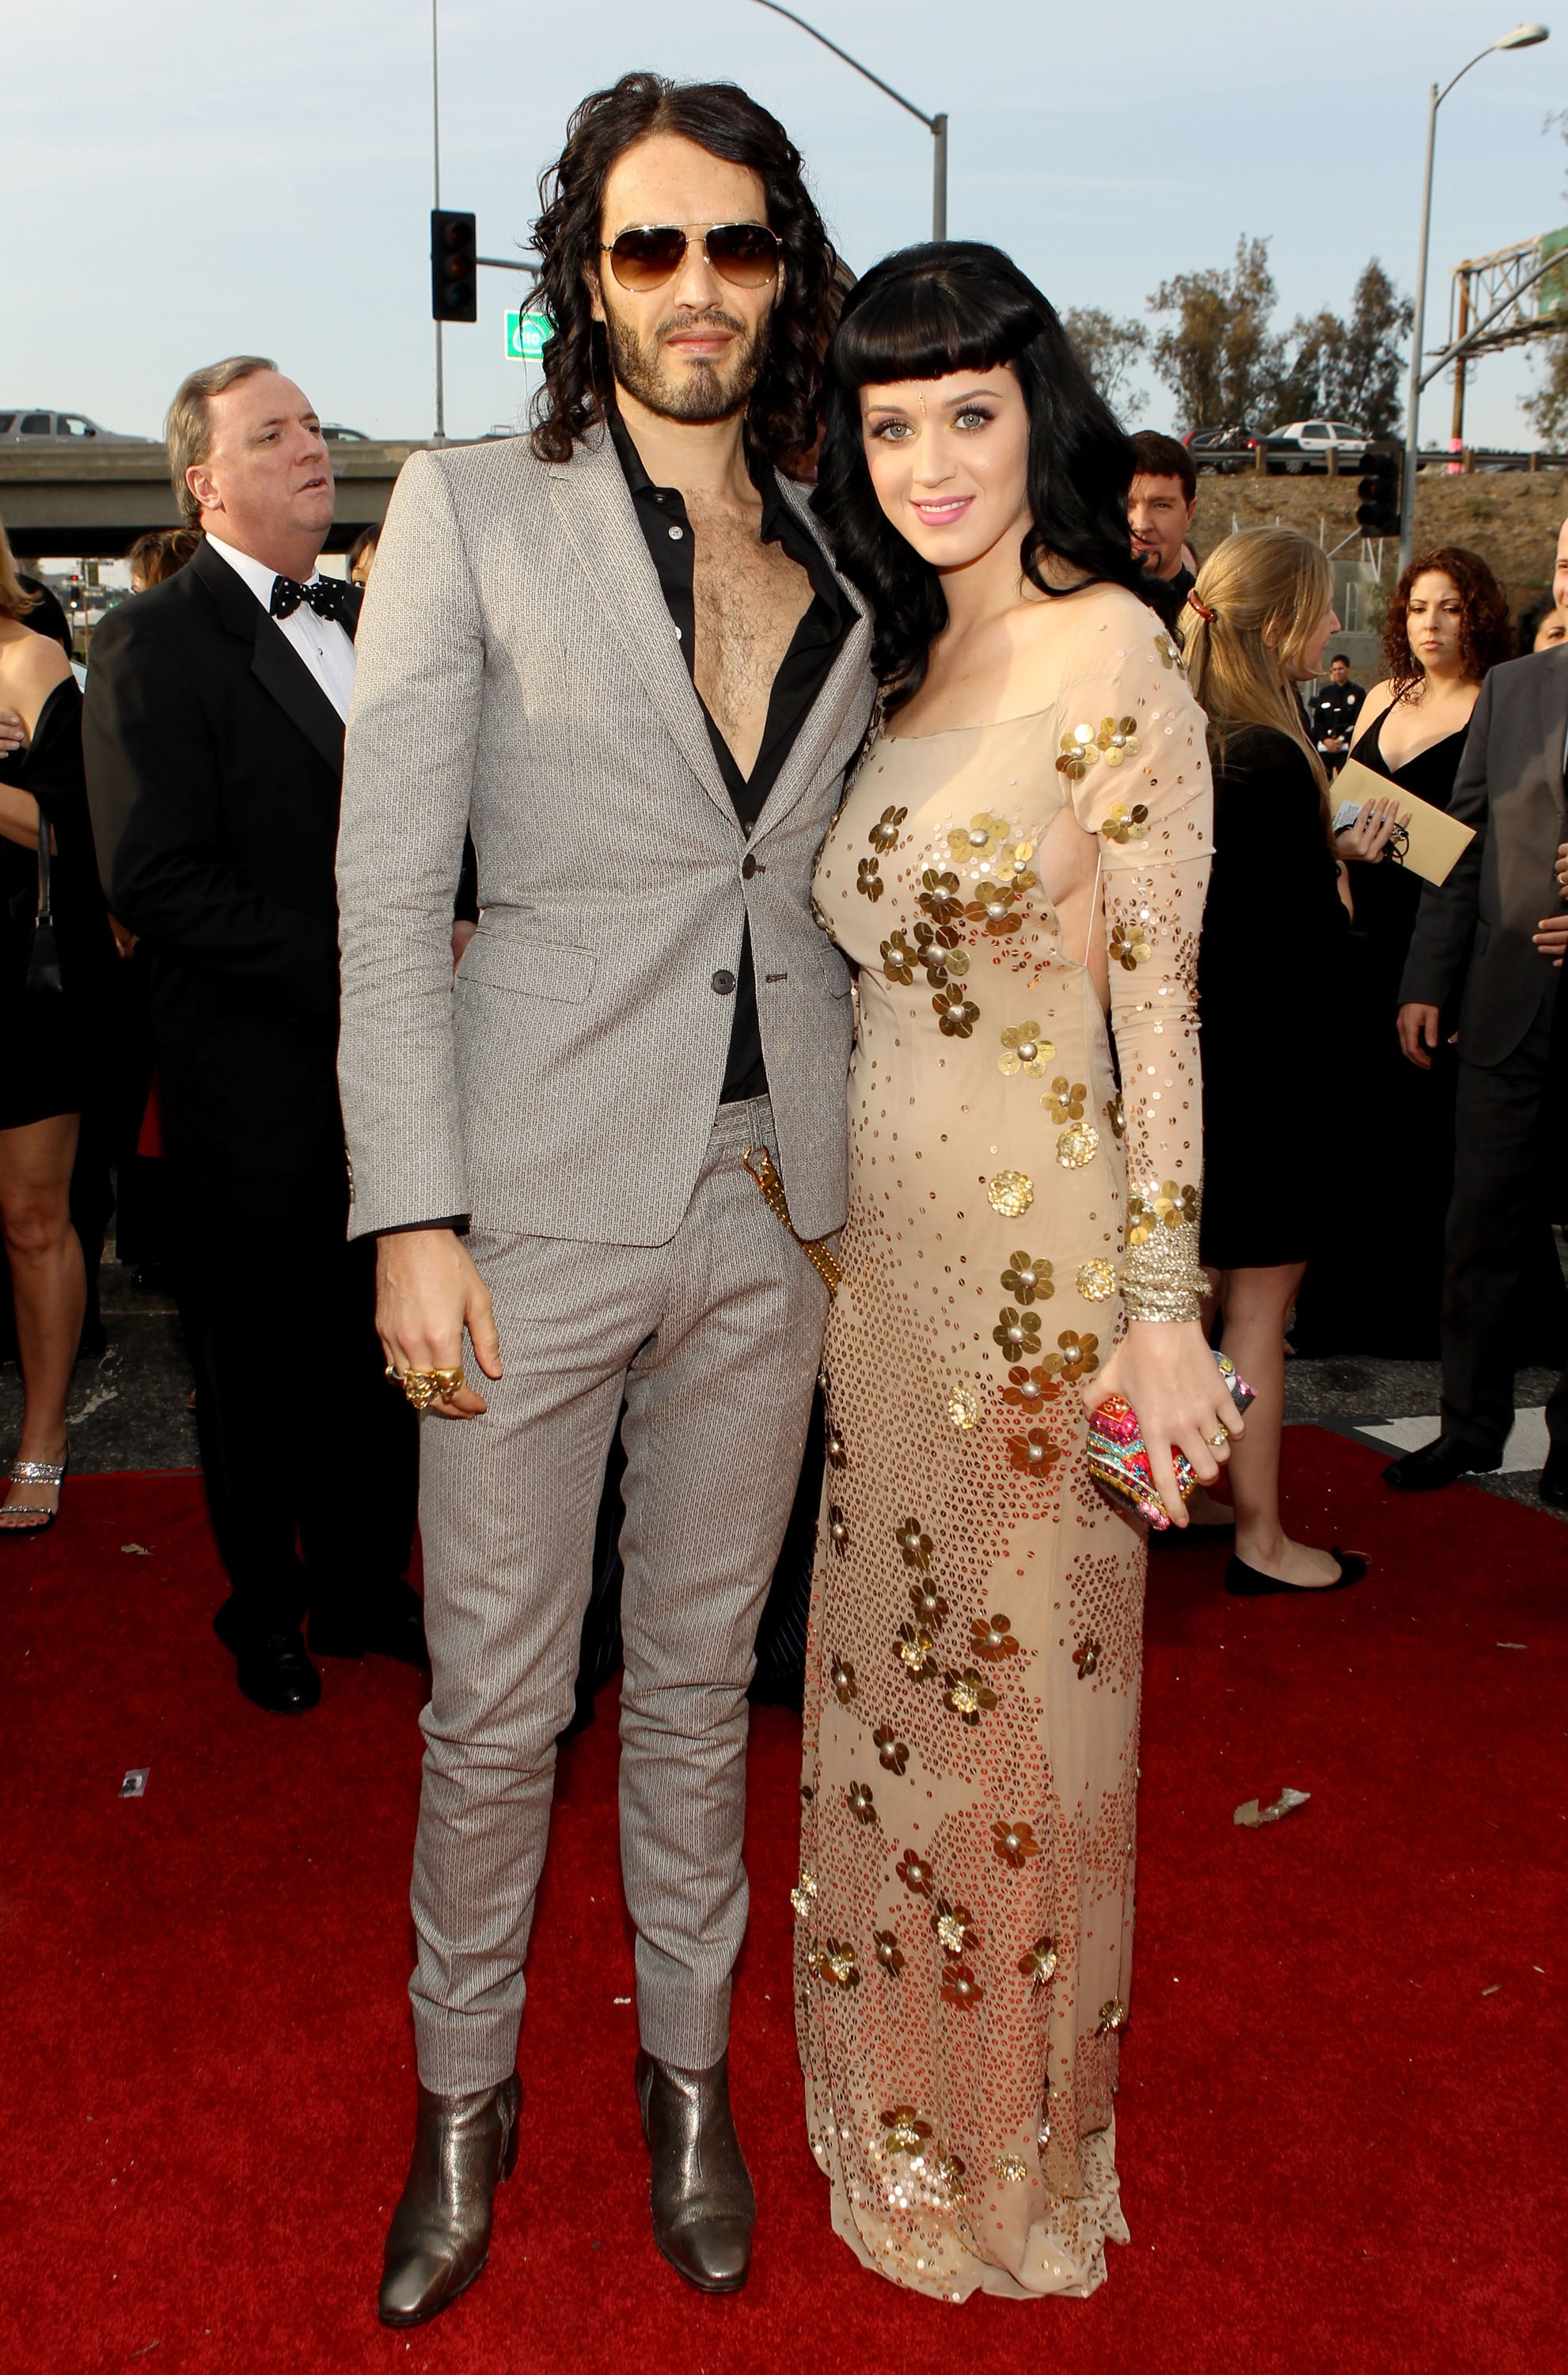 Then-couple Katy Perry and Russell Brand stayed close on the red carpet before 2010's star-studded ceremony.